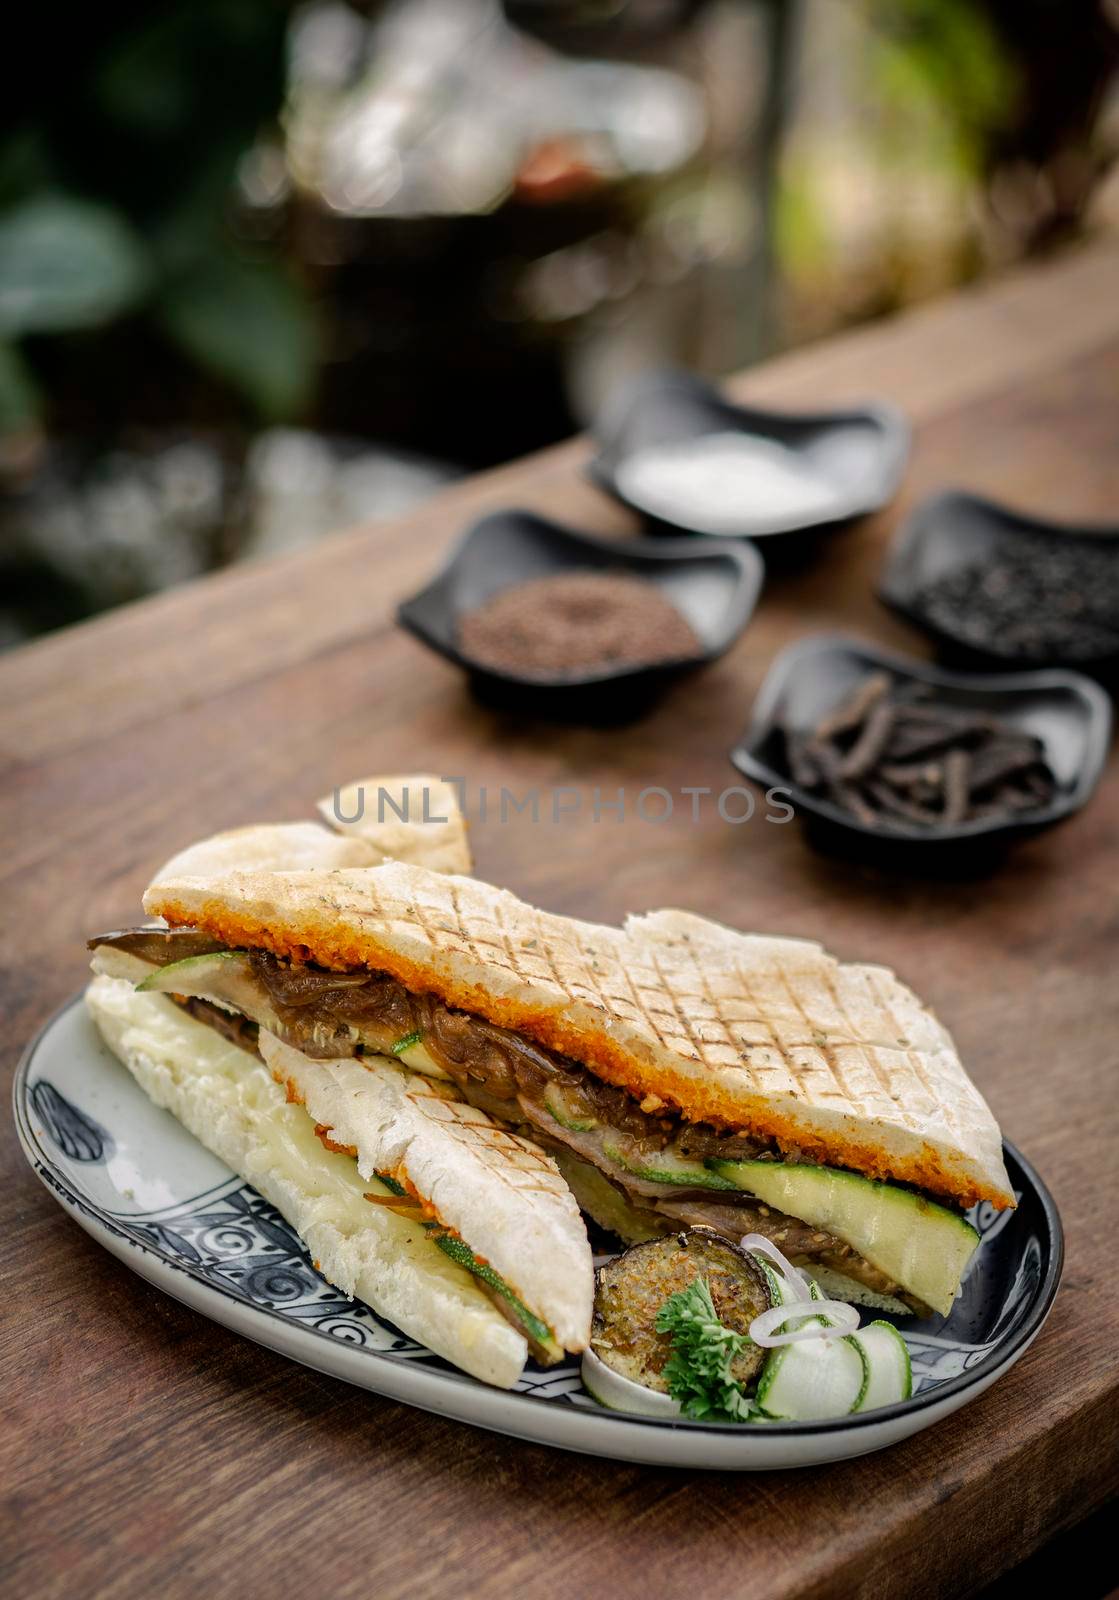 vegan roasted vegetable toasted panini sandwich on wood table outdoors by jackmalipan